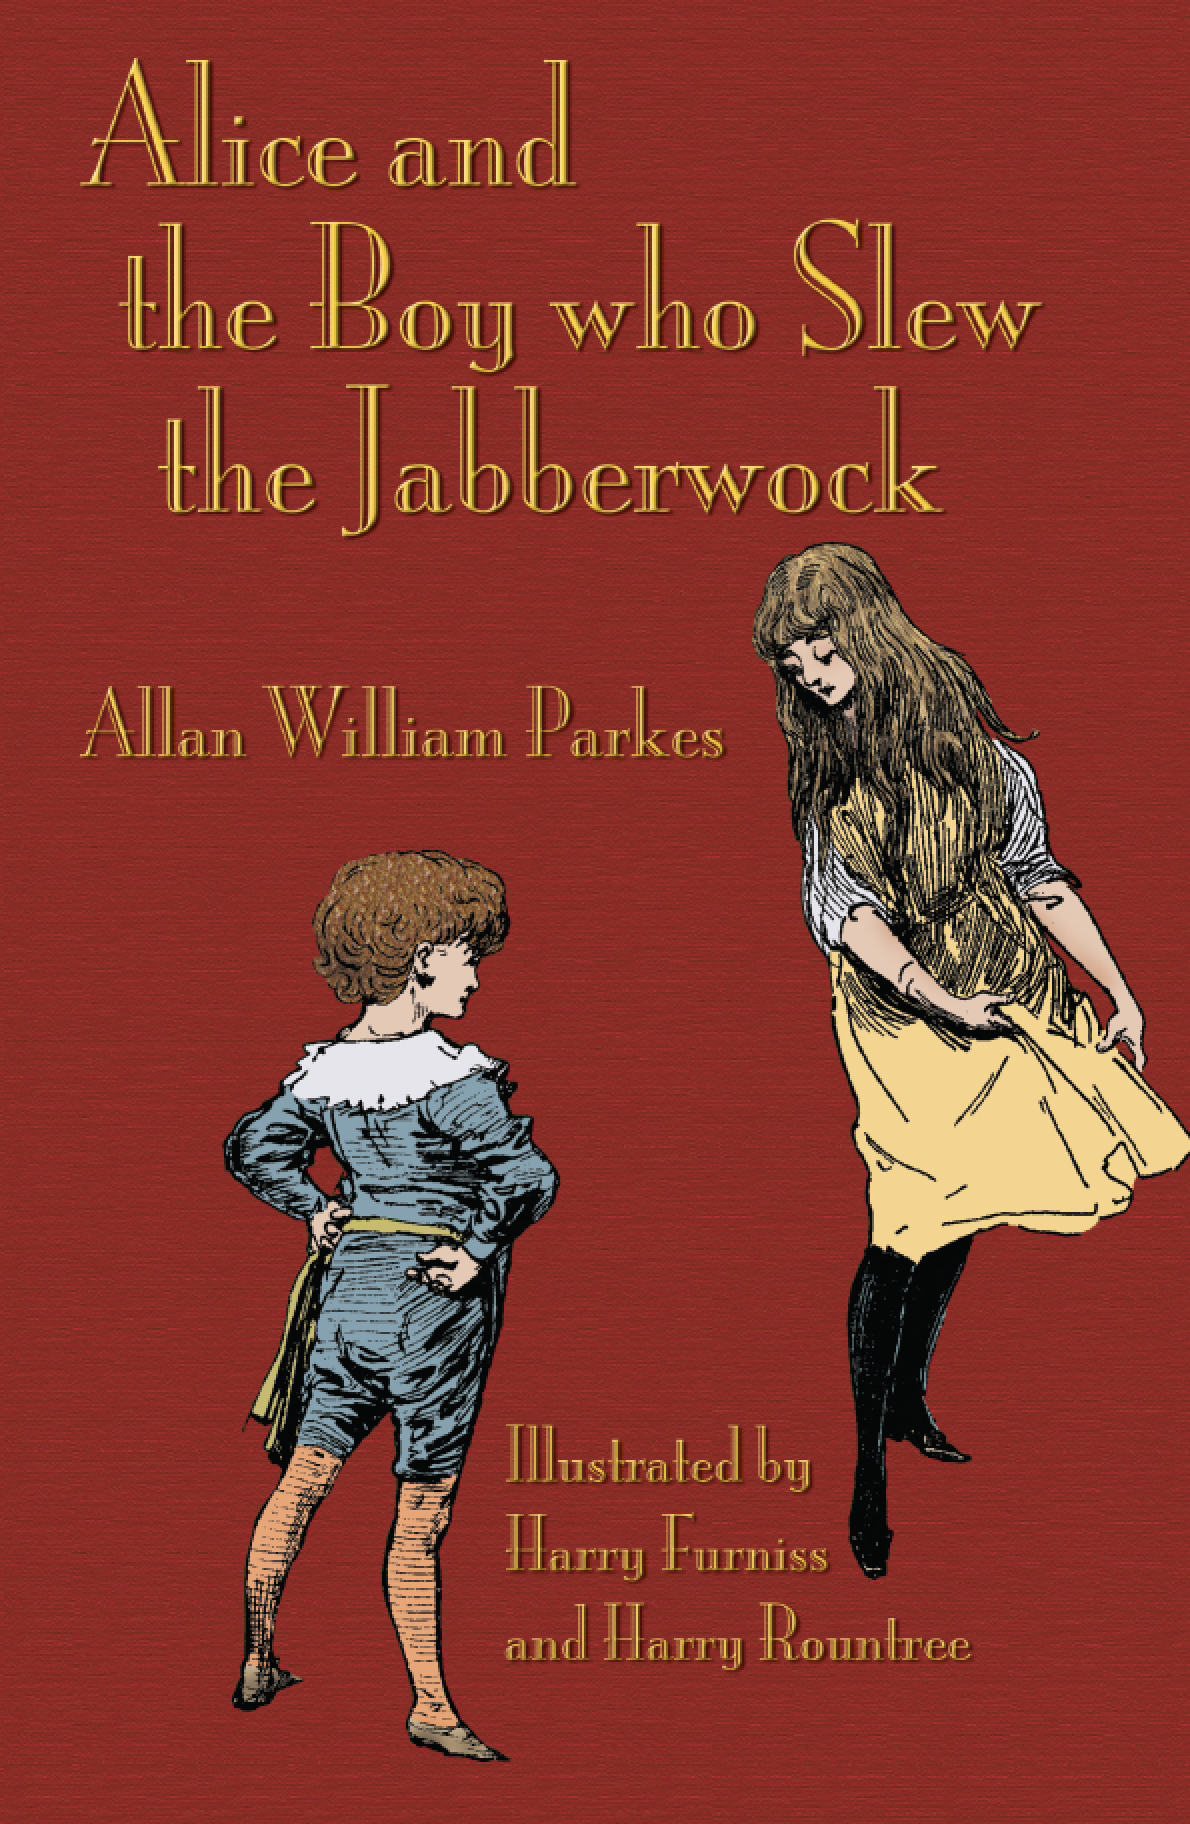 Alice and the Boy who Slew the Jabberwock